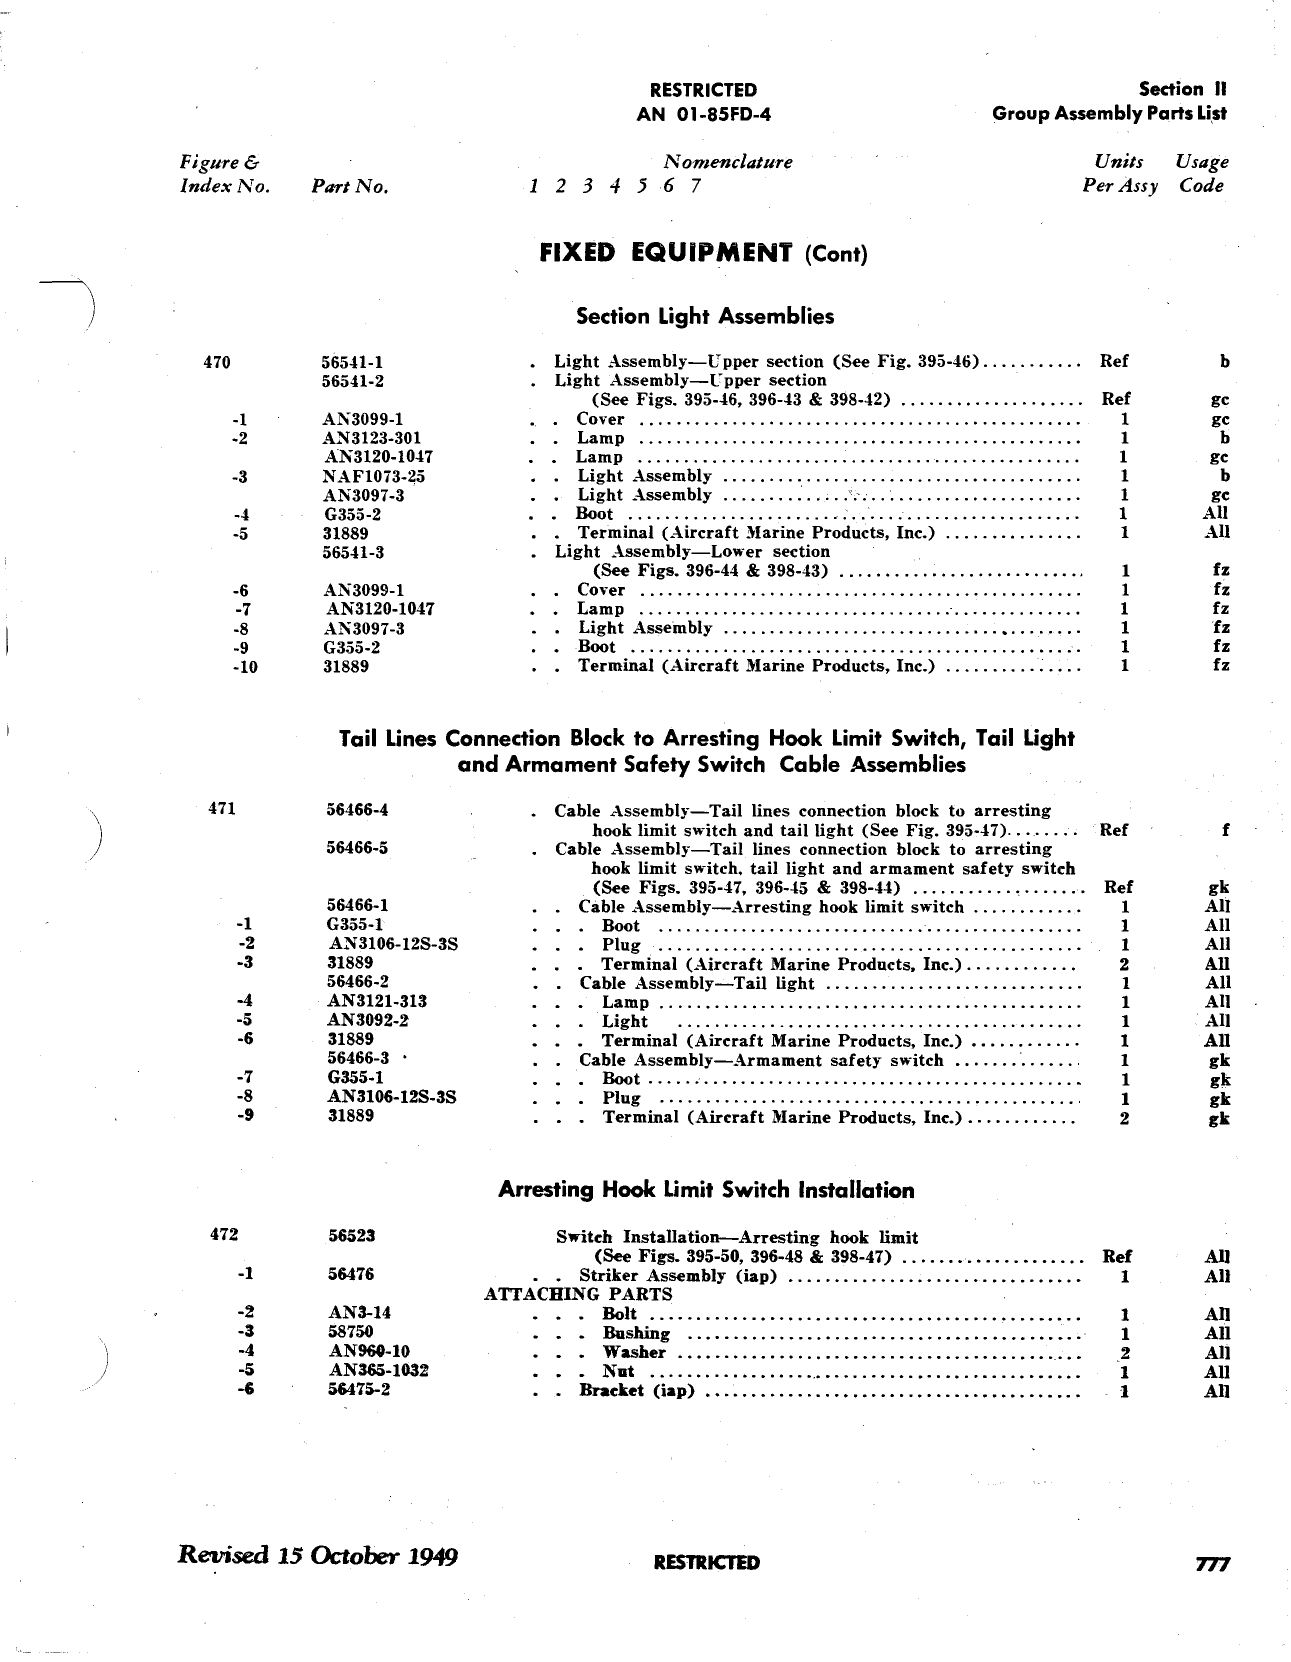 Sample page 789 from AirCorps Library document: Parts Catalog - F8F